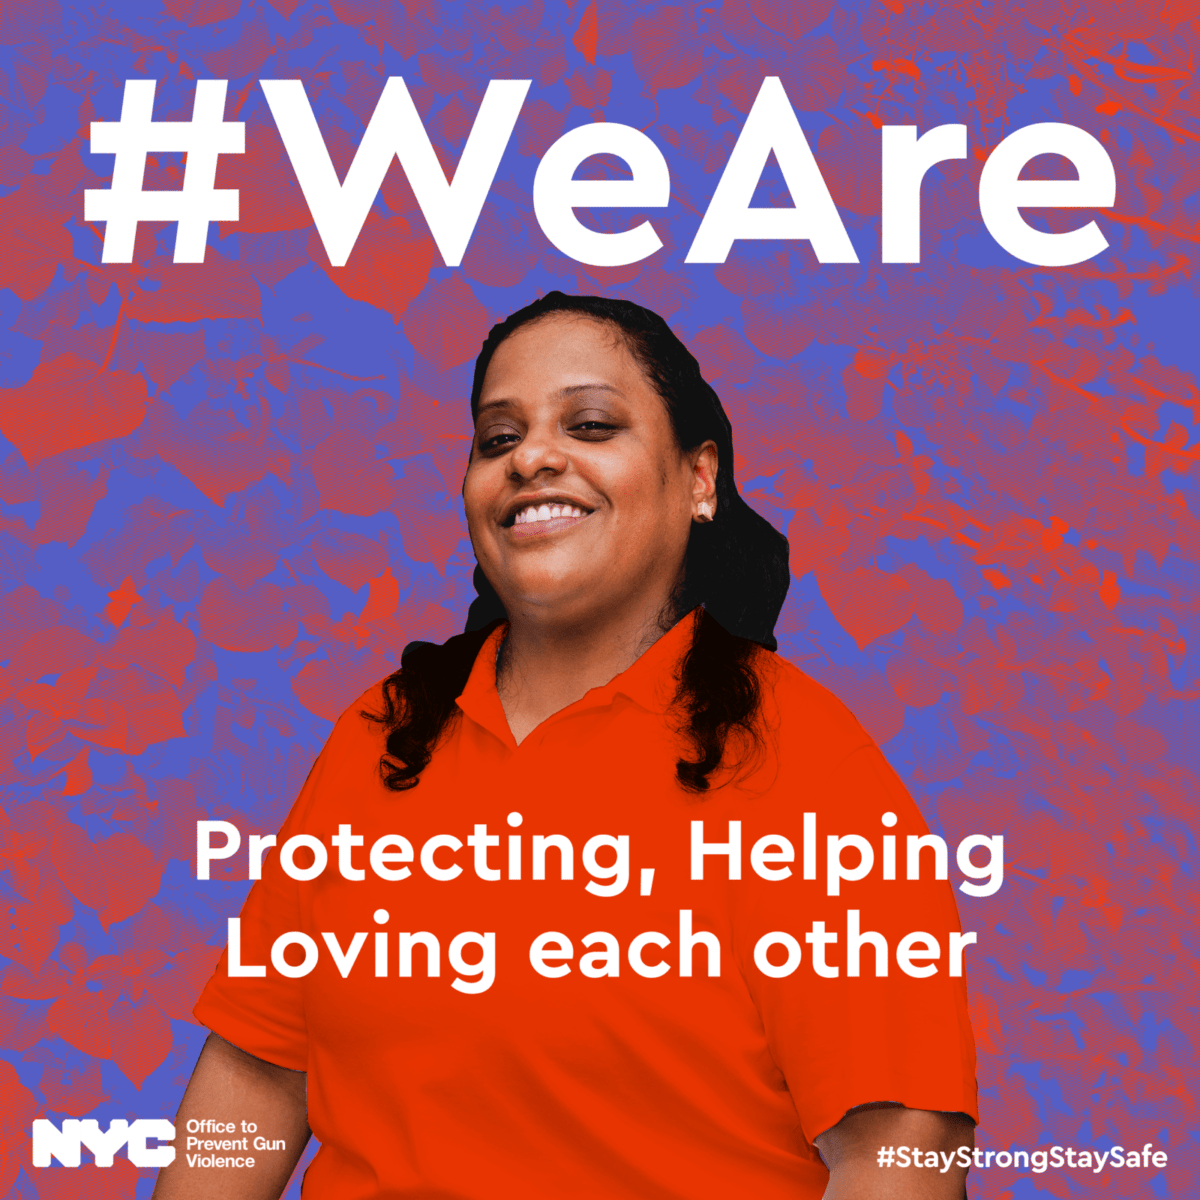 #WeAre Protecting, Helping, Loving each other